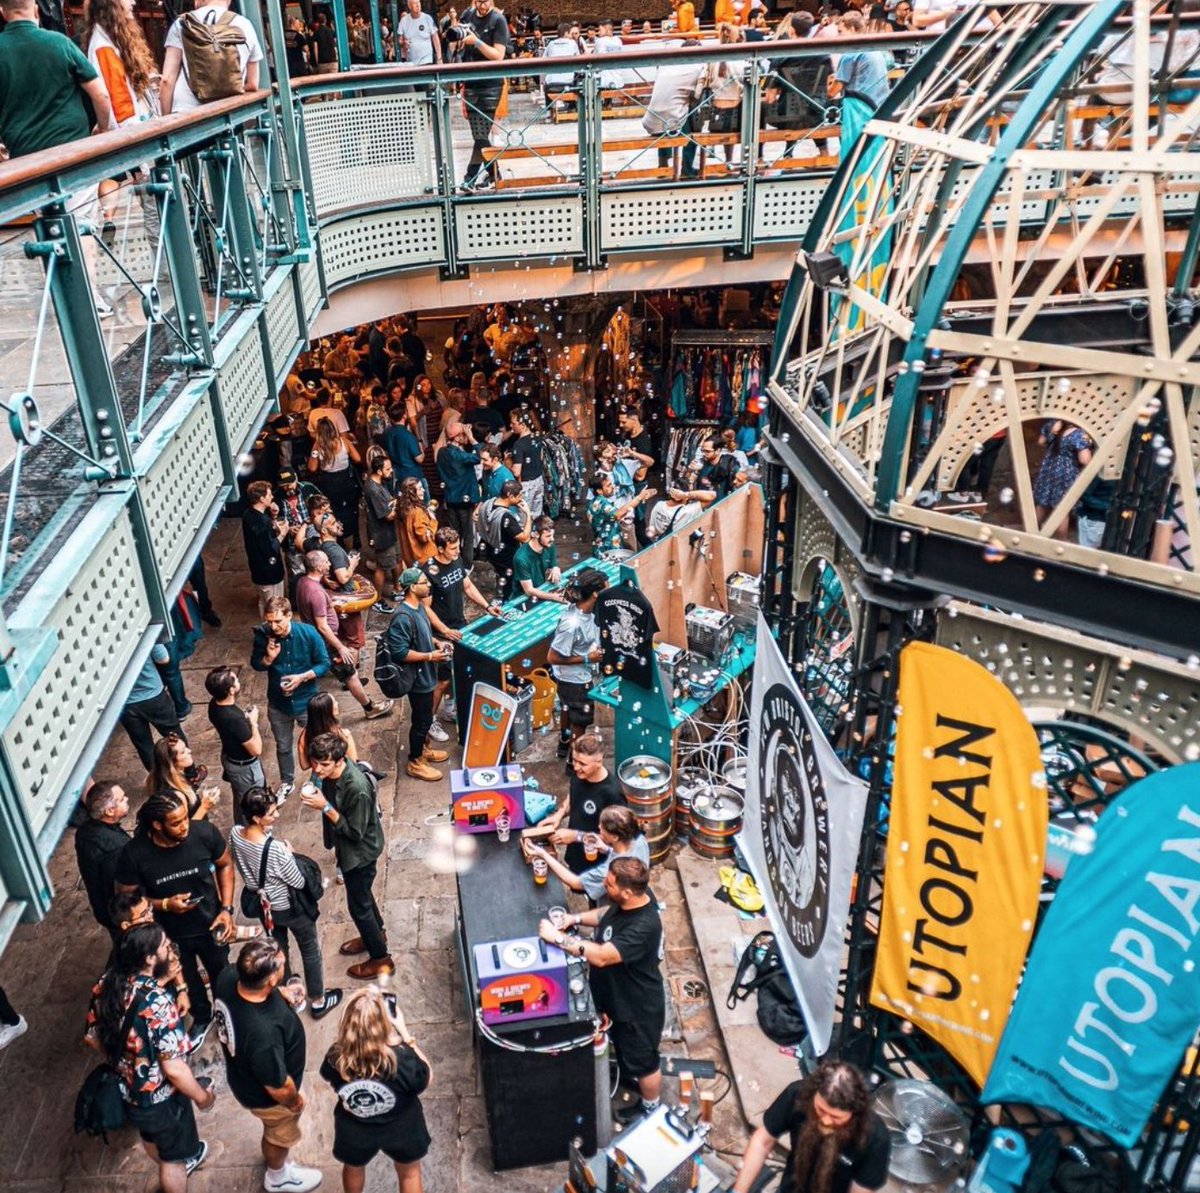 Calling all beer lovers & connoisseurs 🍻 We've got tickets from @weare_BEER dropping soon, but you're going to need to be quick 👀 @BristolCBF (7 - 8 Jun) @manchestercbf (5 - 6 Jul) @LCBFestival (10 - 11 Aug) Tickets will drop at 10am on Thu 8 Apr - Set your alarms ⏰